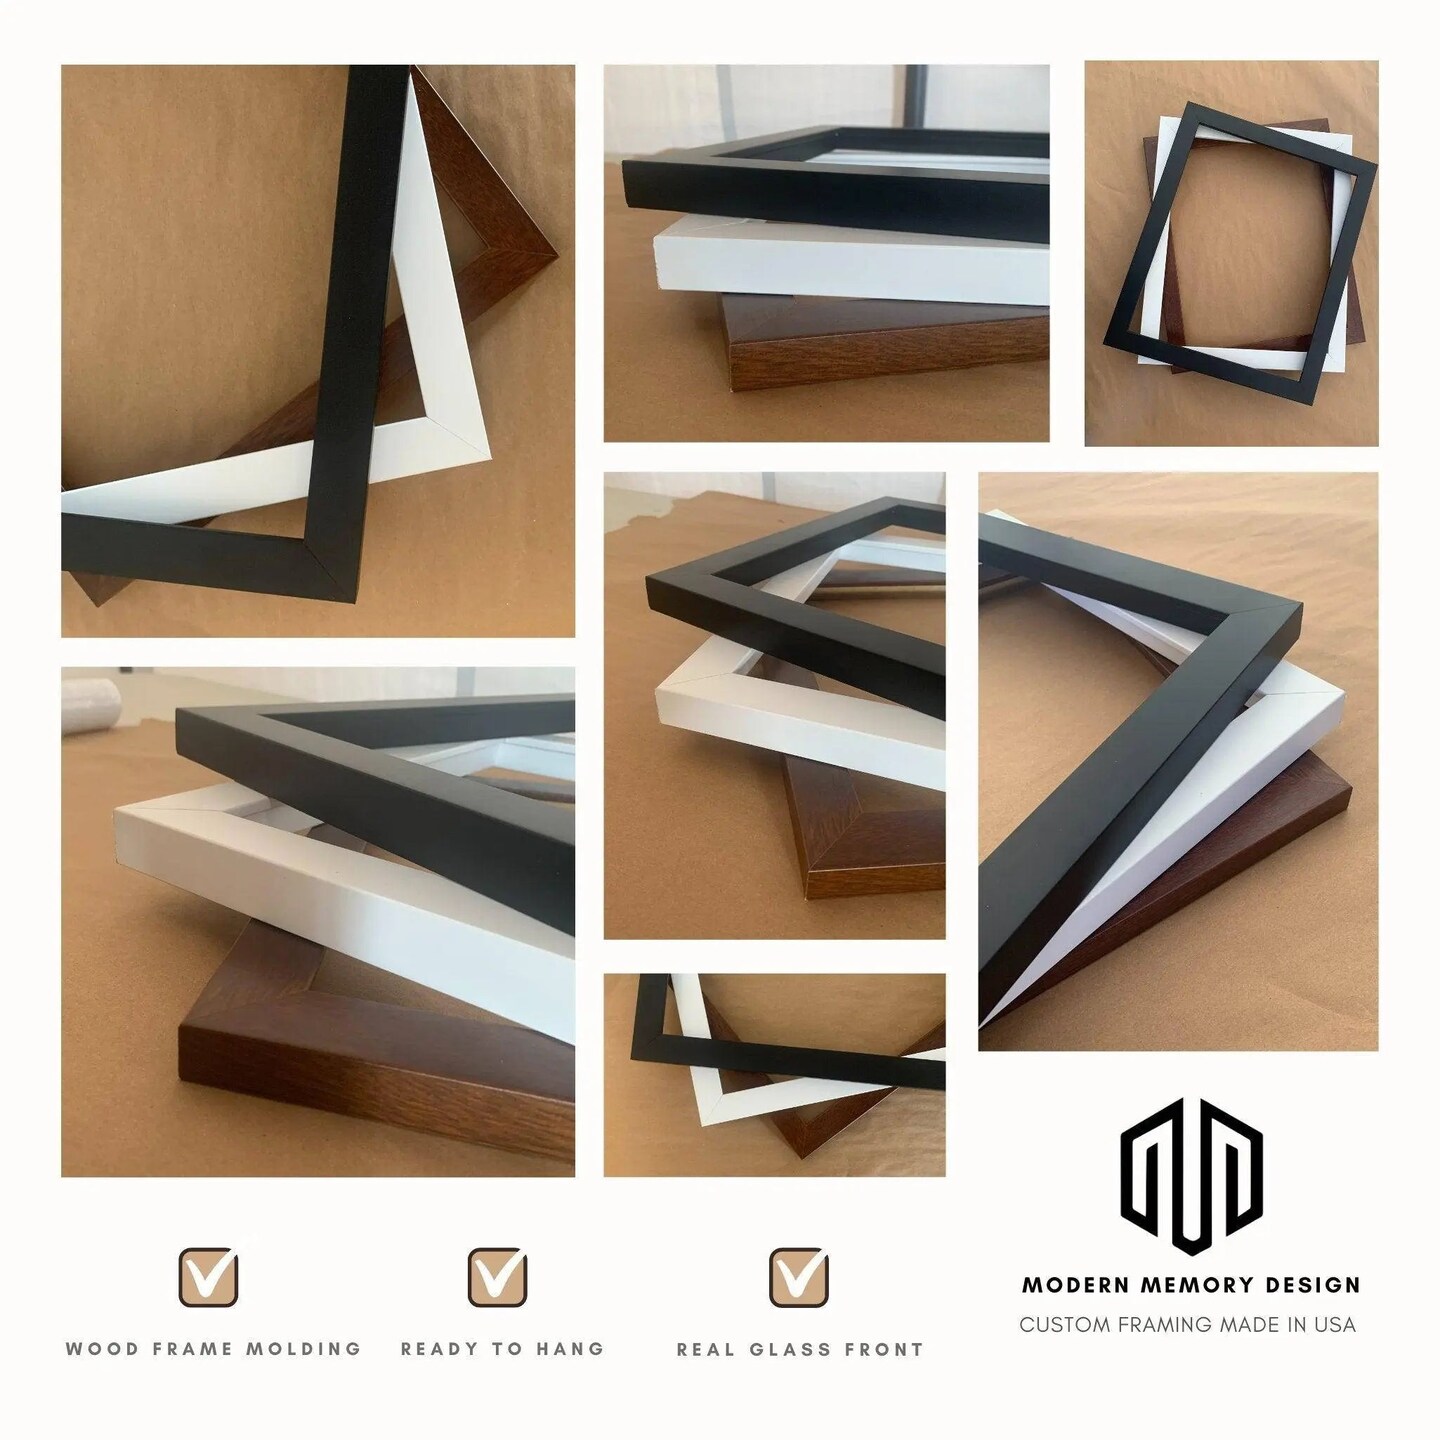 6 X 6 Square Picture Frames for sale